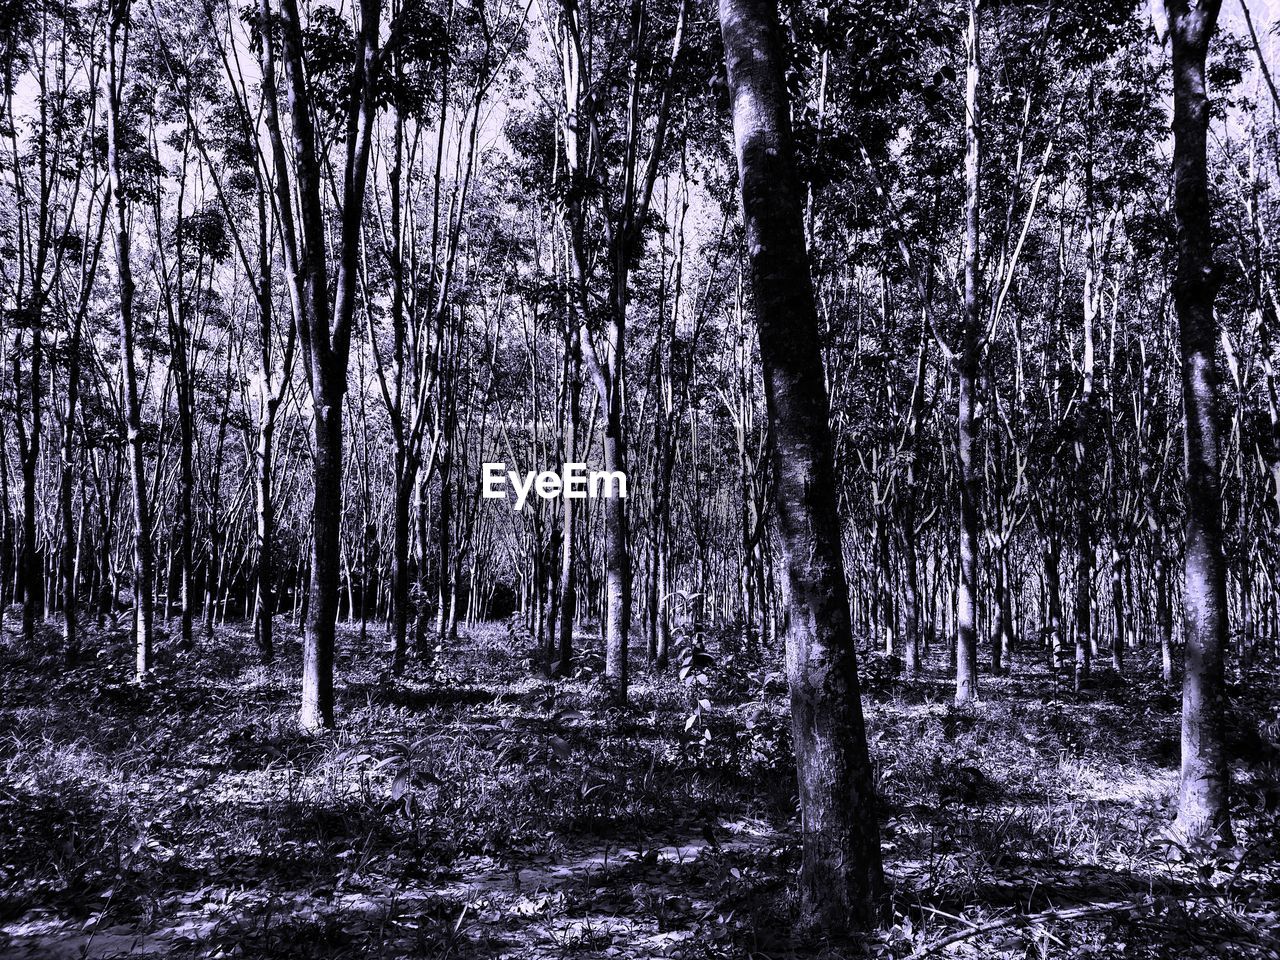 VIEW OF TREES IN THE FOREST